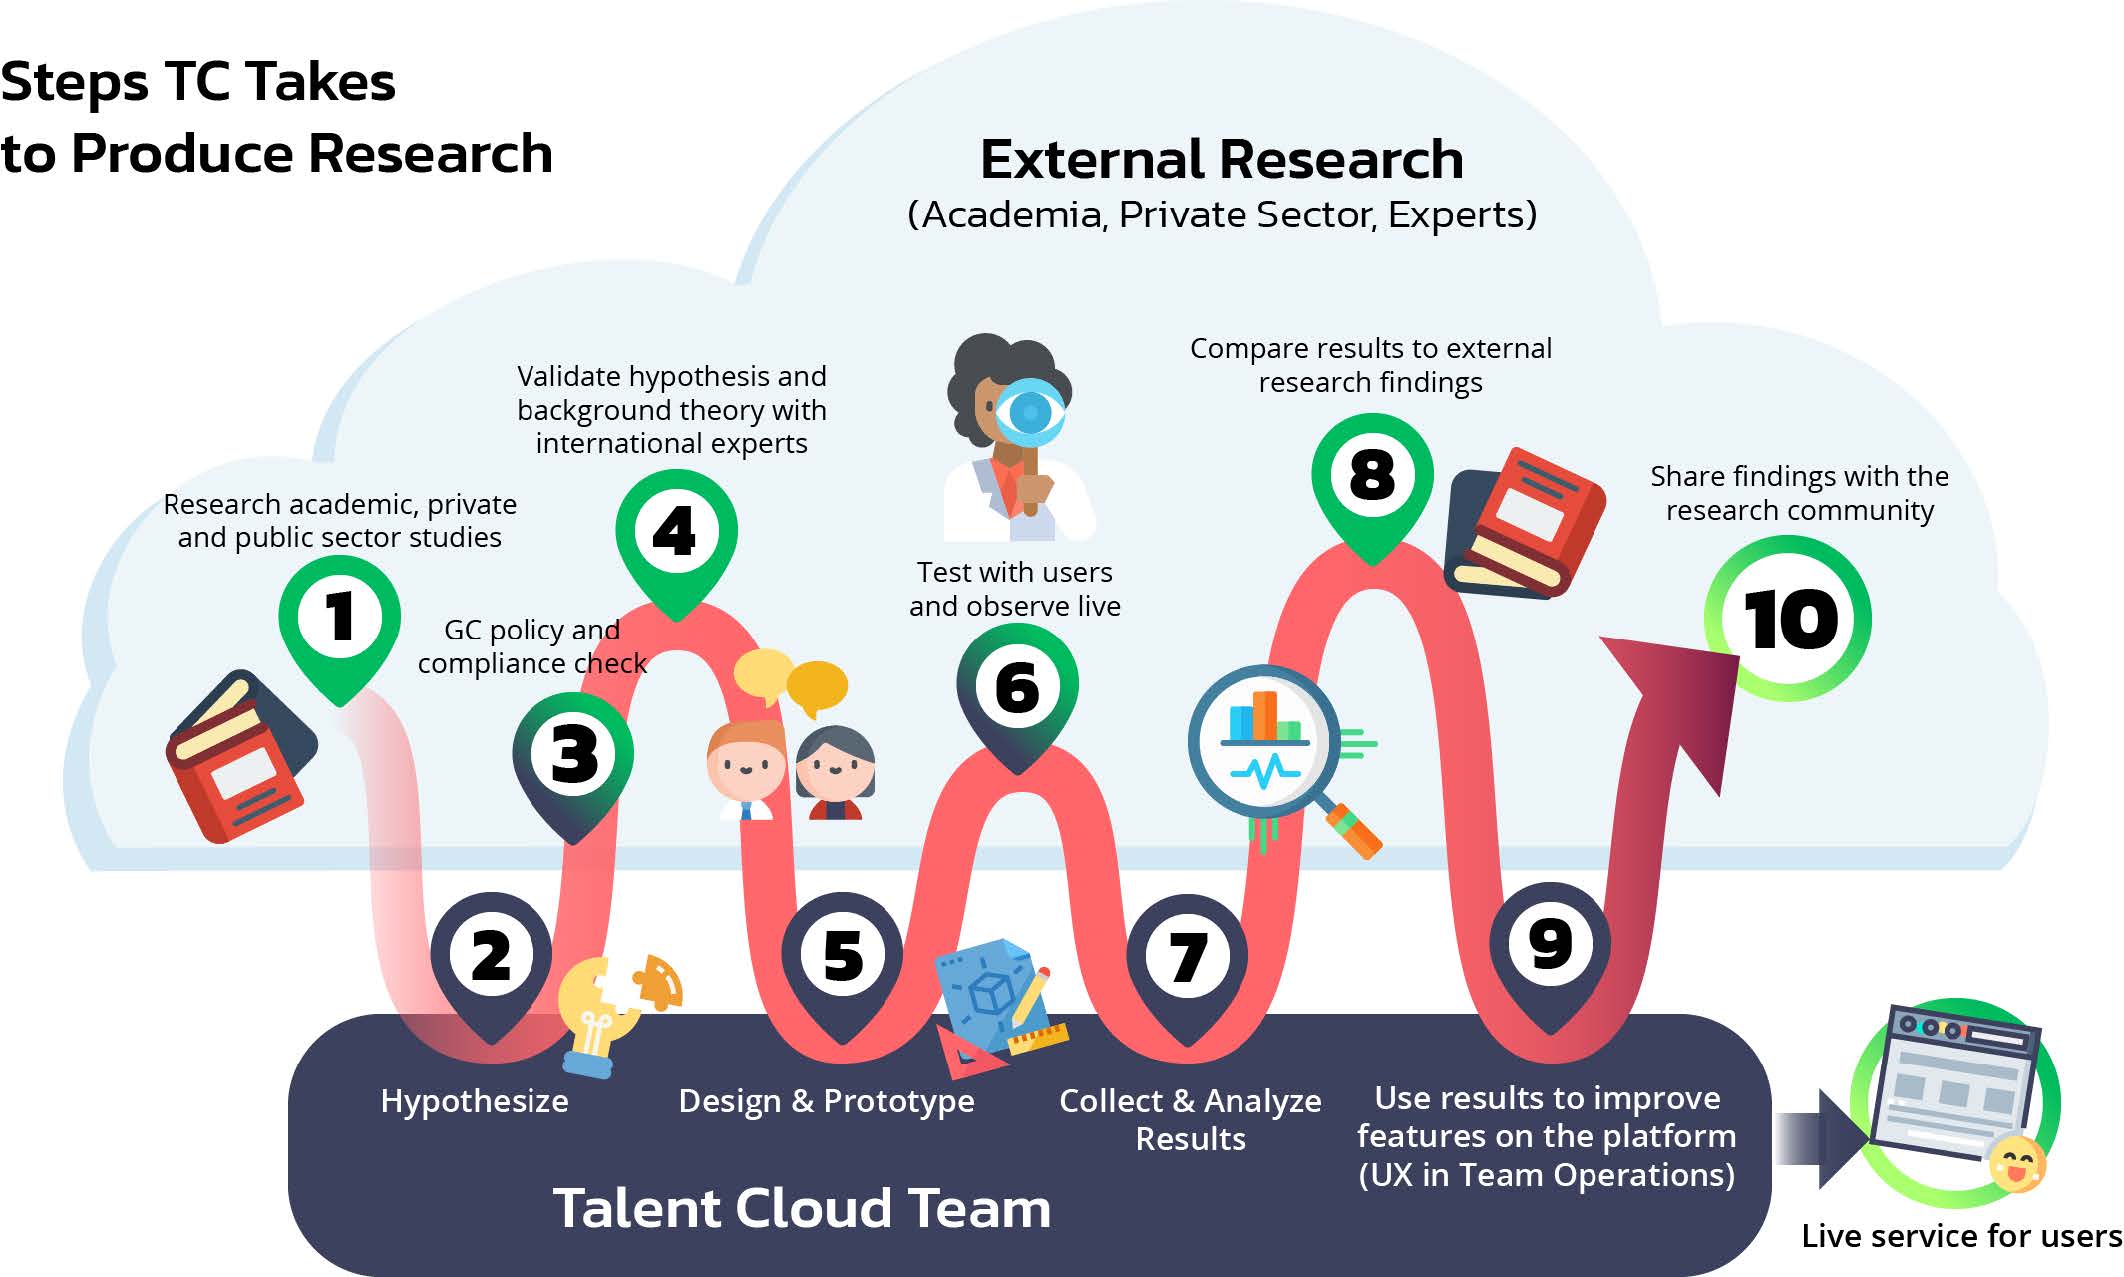 A graphic representing Talent Cloud's research engine. It showcases the steps Talent Cloud takes to produce research in 10 steps that involve two key areas: External research from academia, the private sector, and experts, and research the Talent Cloud team produces itself. The first step of the process involves sourcing research from academic, private, and public sector studies. The second step requires Talent Cloud to hypothesize based on this research. The third step involves a Government of Canada policy and compliance check. The fourth step validates Talent Cloud's hypothesis and background theory with international experts. The fifth step takes that validated research and results in design work and product prototypes. The sixth step tests these designs with users so that behaviour can be recorded live. The seventh step is collecting and analyzing the results from user testing. The eighth step compares these results to external research findings. The ninth step uses these final research results to improve features on the Talent Cloud platform by the UX team, which results in a live service for users. The tenth and final step is sharing those research findings with the broader community.